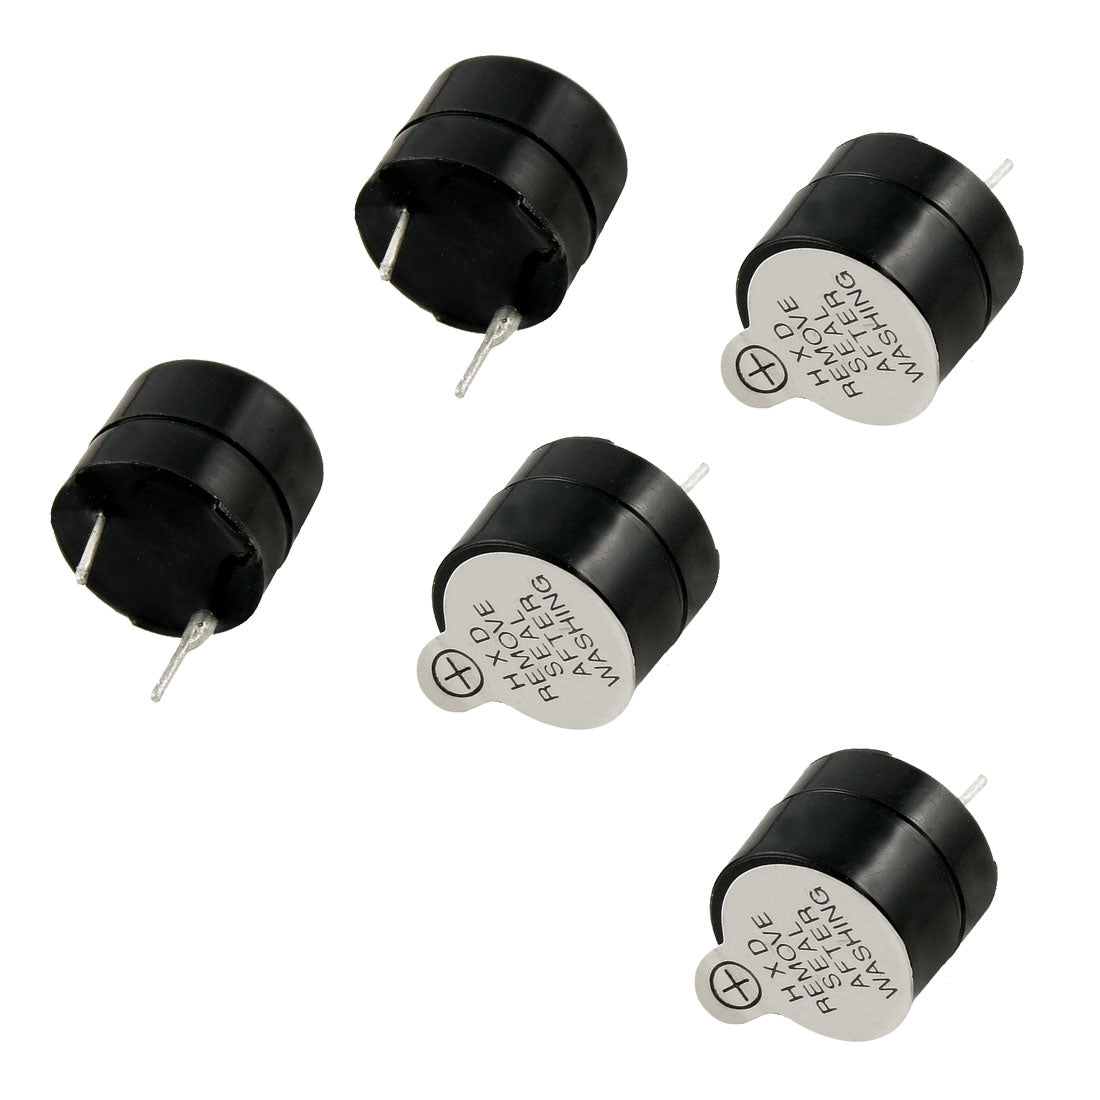 uxcell Uxcell 12mm Dia 5 Pcs DC 12V 2 Terminals Electronic Continuous Sound Buzzer